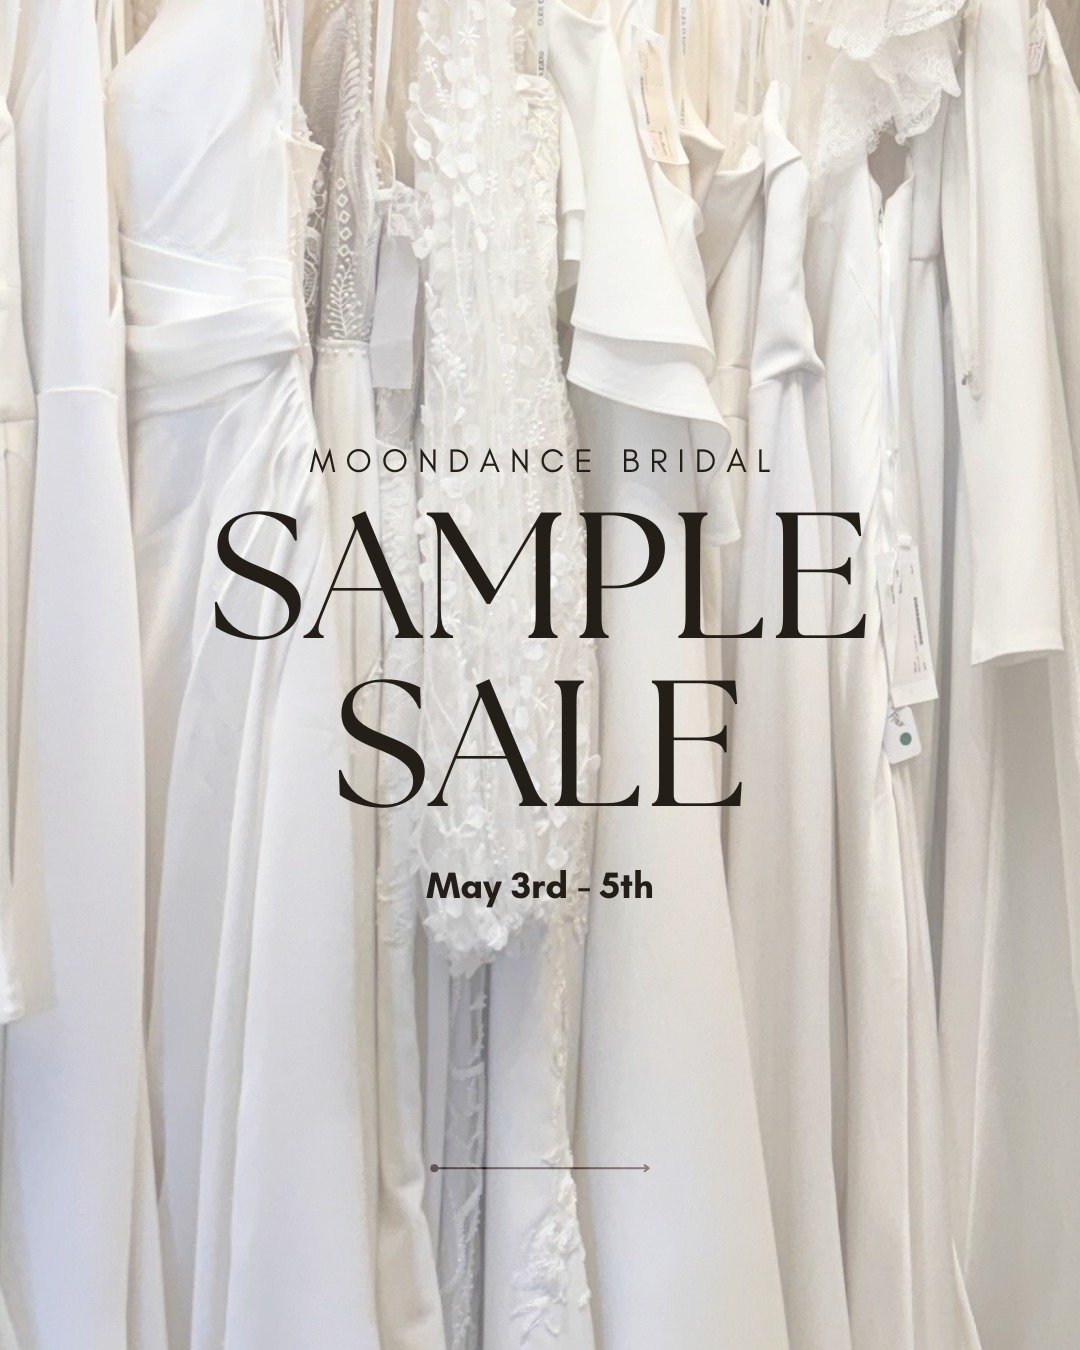 ⚡️Surprise! We are doing a flash Sample Sale all weekend long! ⚡️⁠
⁠
The details: ⁠
💖 Sample Sale Hours:⁠
- Friday Hours: 10:00am - 3:00pm⁠
- Saturday Hours: 10:00am - 3:30pm⁠
- Sunday Hours: 10:00am - 2:00pm⁠
💖 The event will feature discontinued 